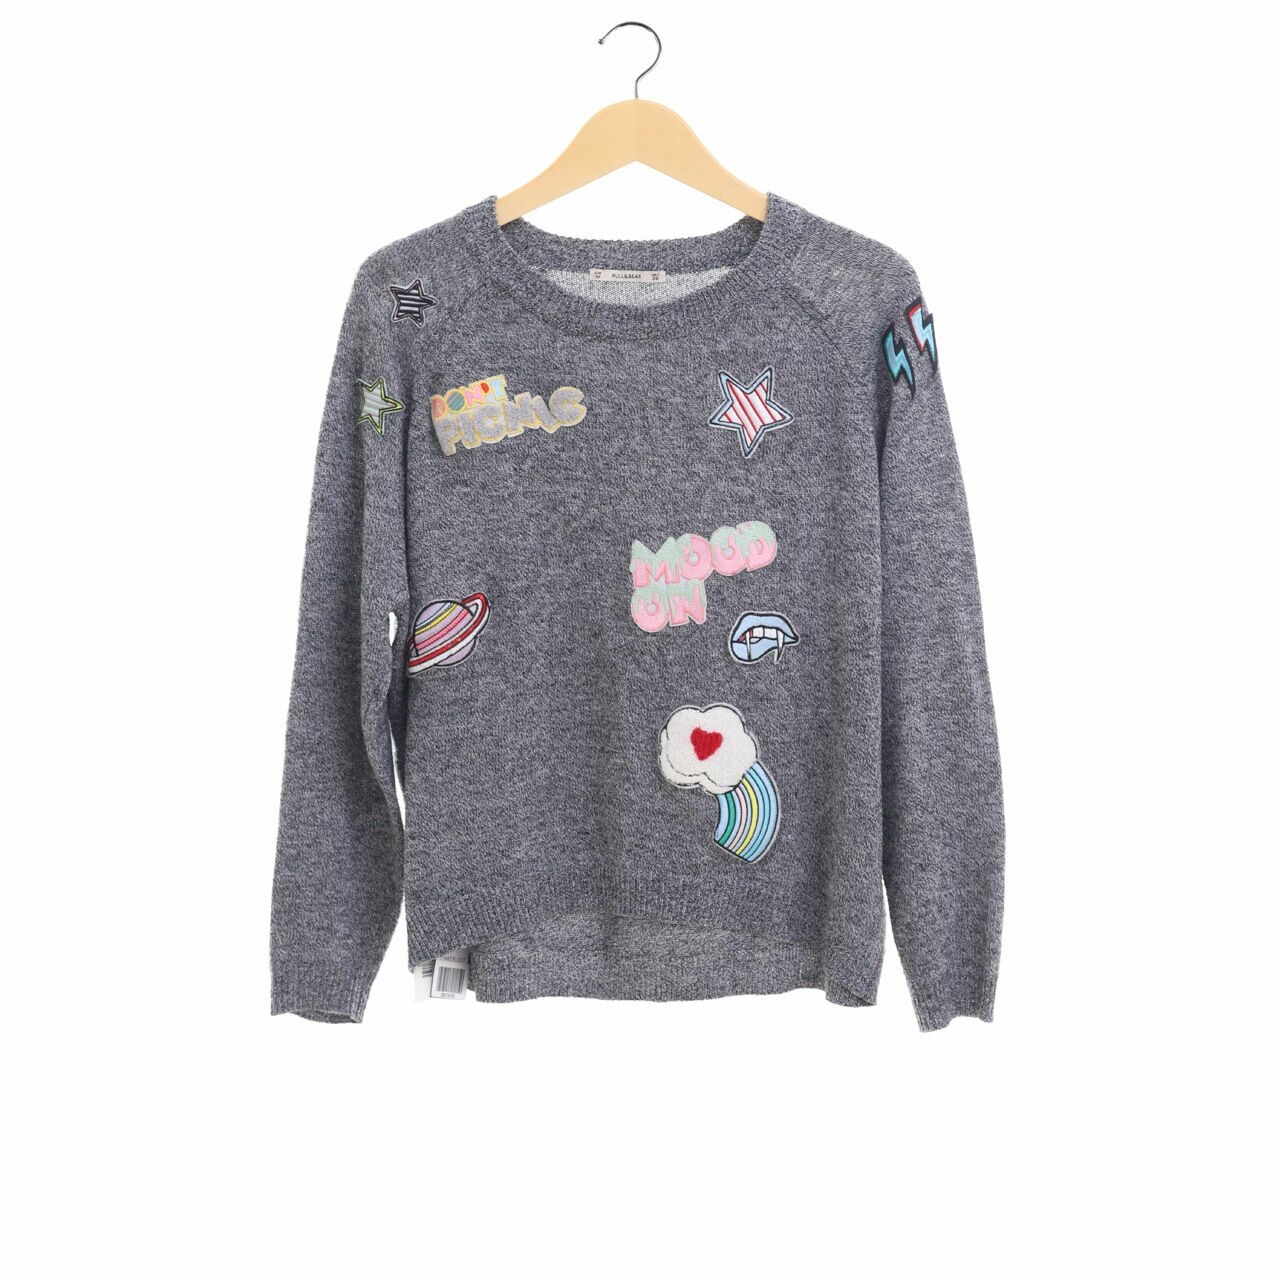 Pull & Bear Grey Knit Patch Sweater